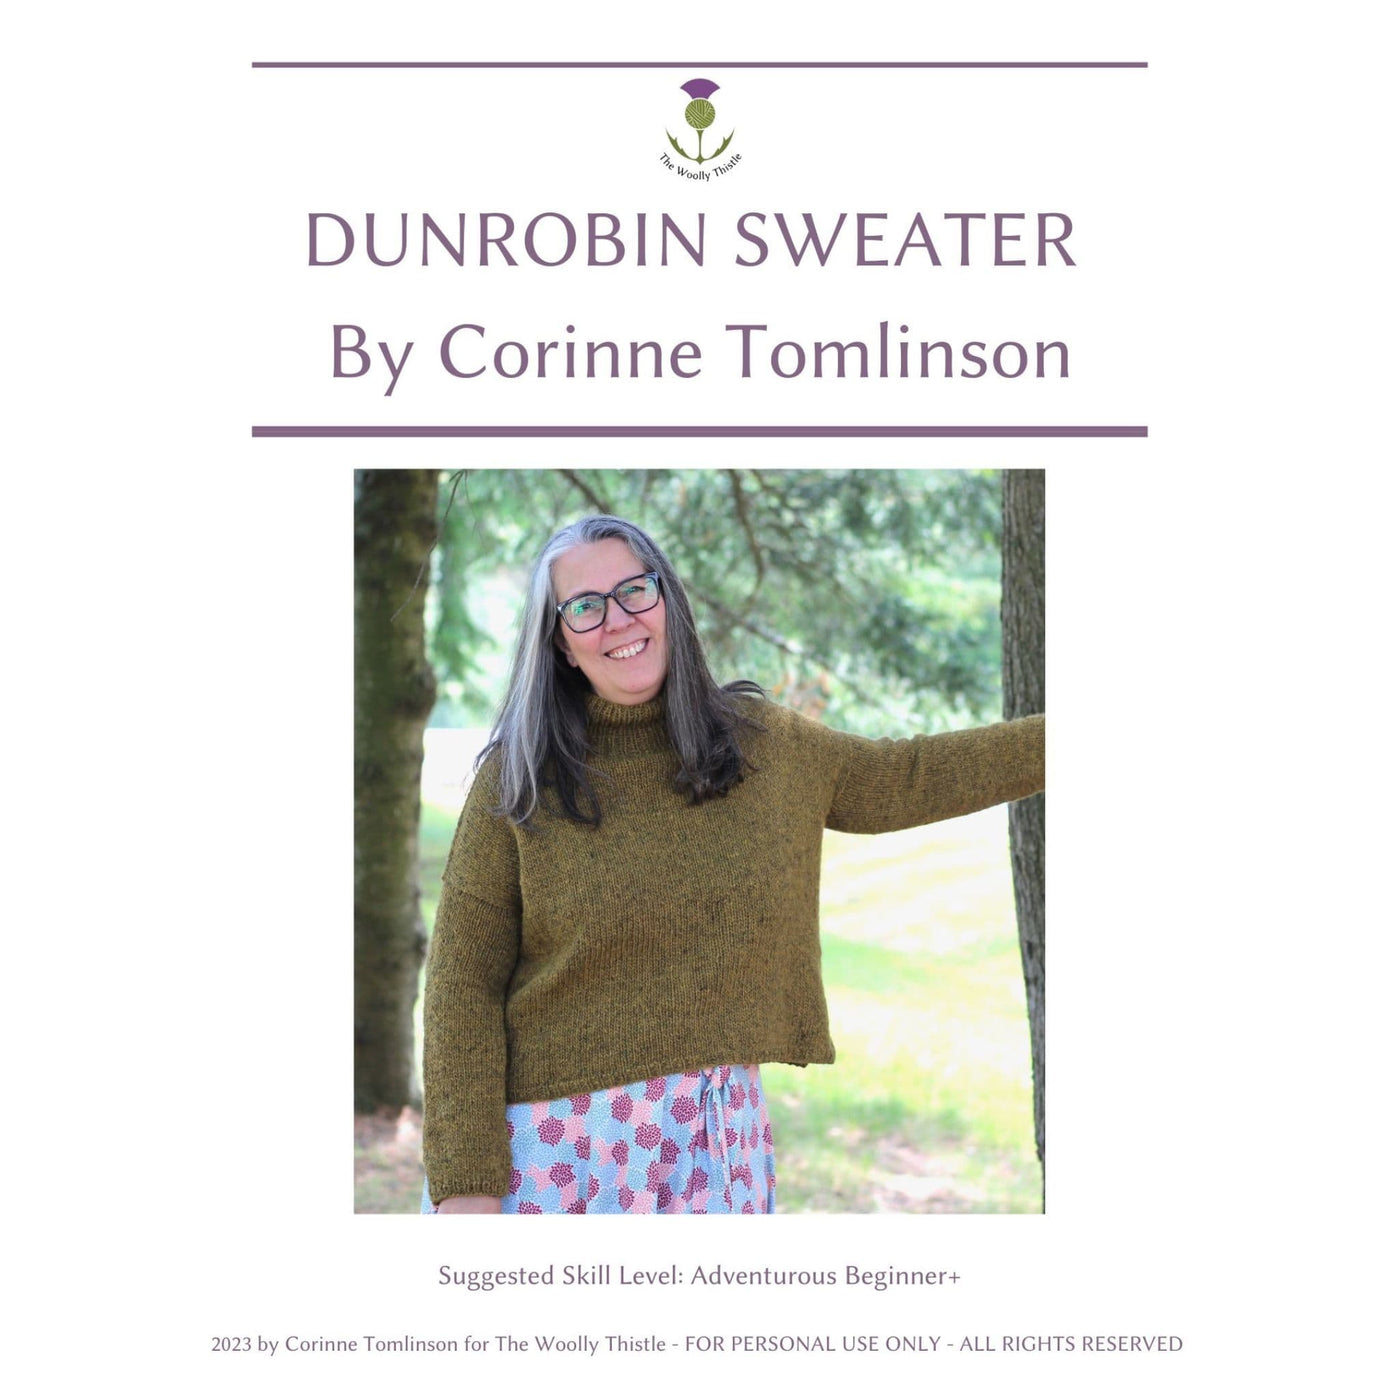 'Knit the Dunrobin Sweater' Course